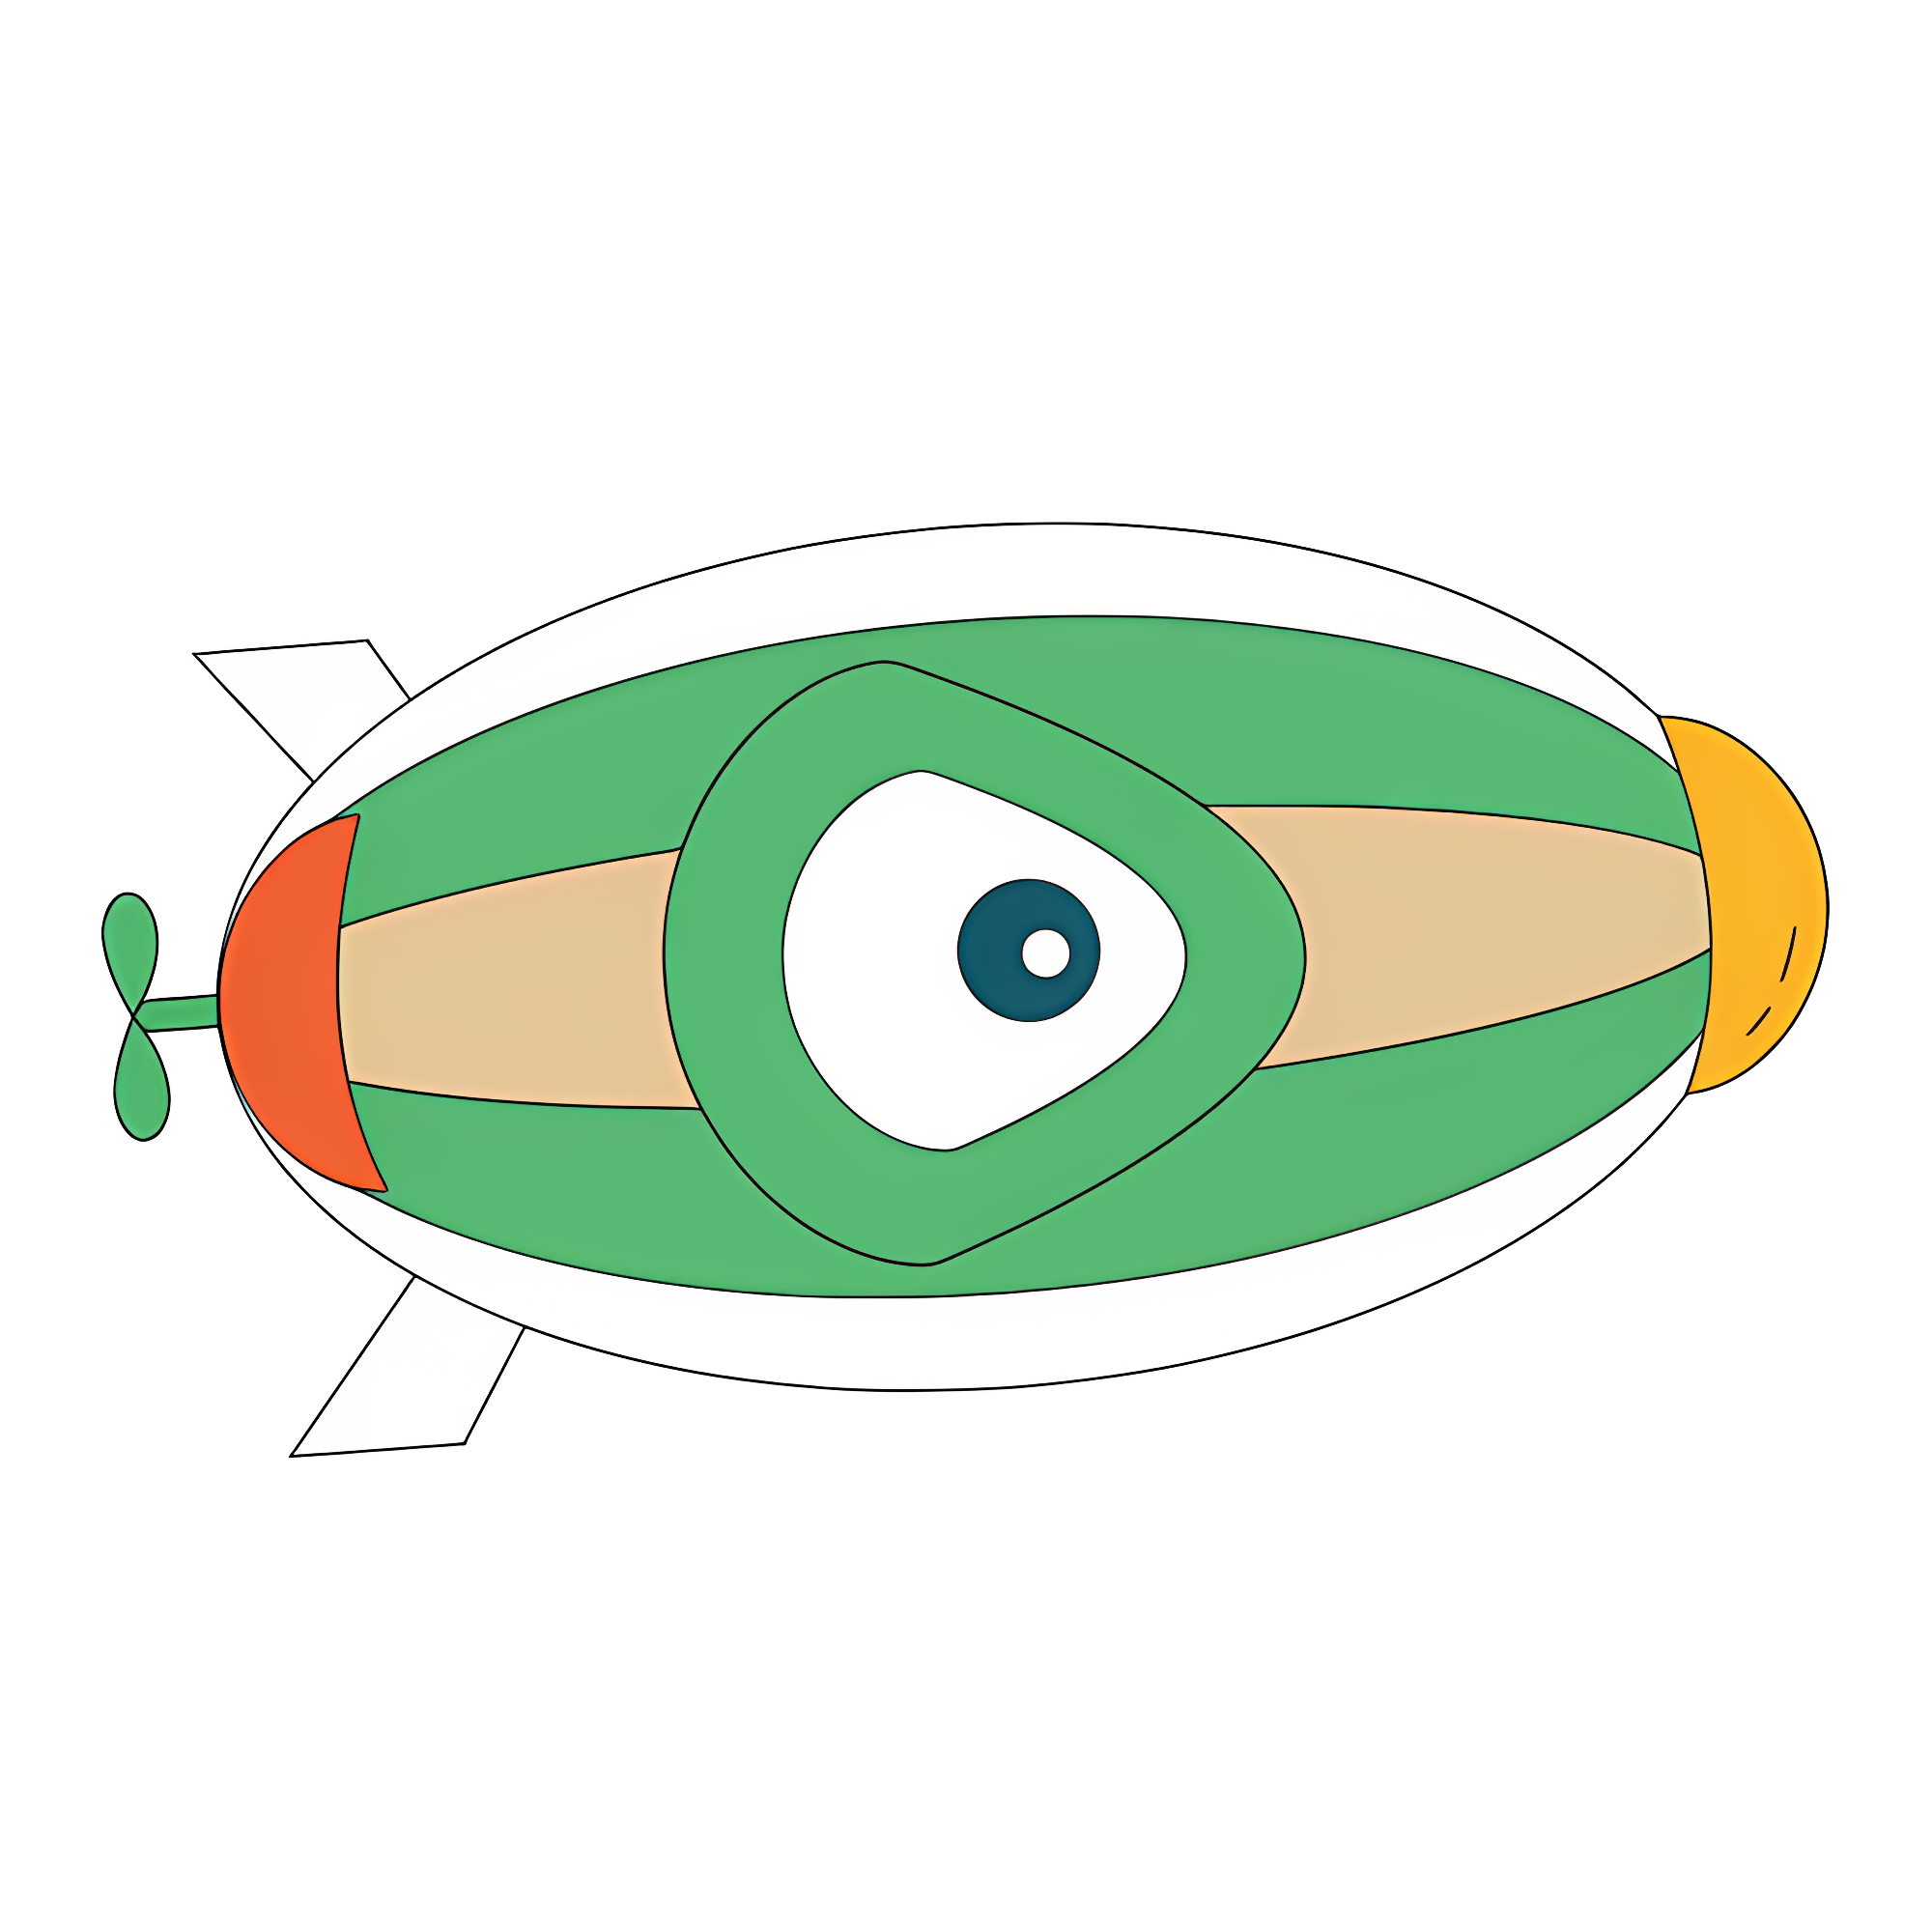 Cartoon aircraft with big eye and wings Clipart